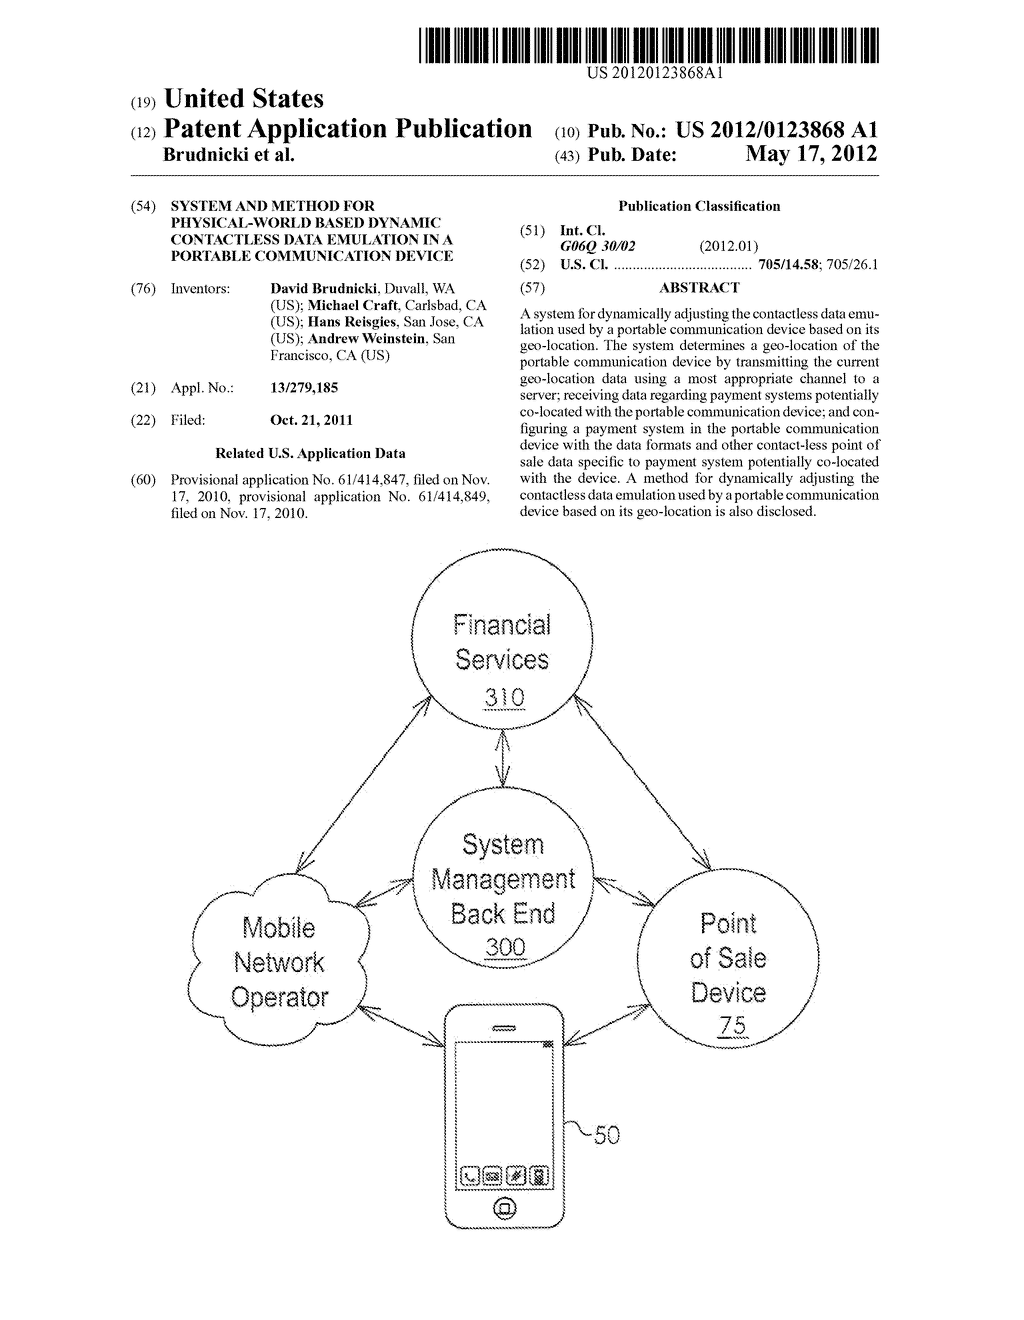 System and Method for Physical-World Based Dynamic Contactless Data     Emulation in a Portable Communication Device - diagram, schematic, and image 01